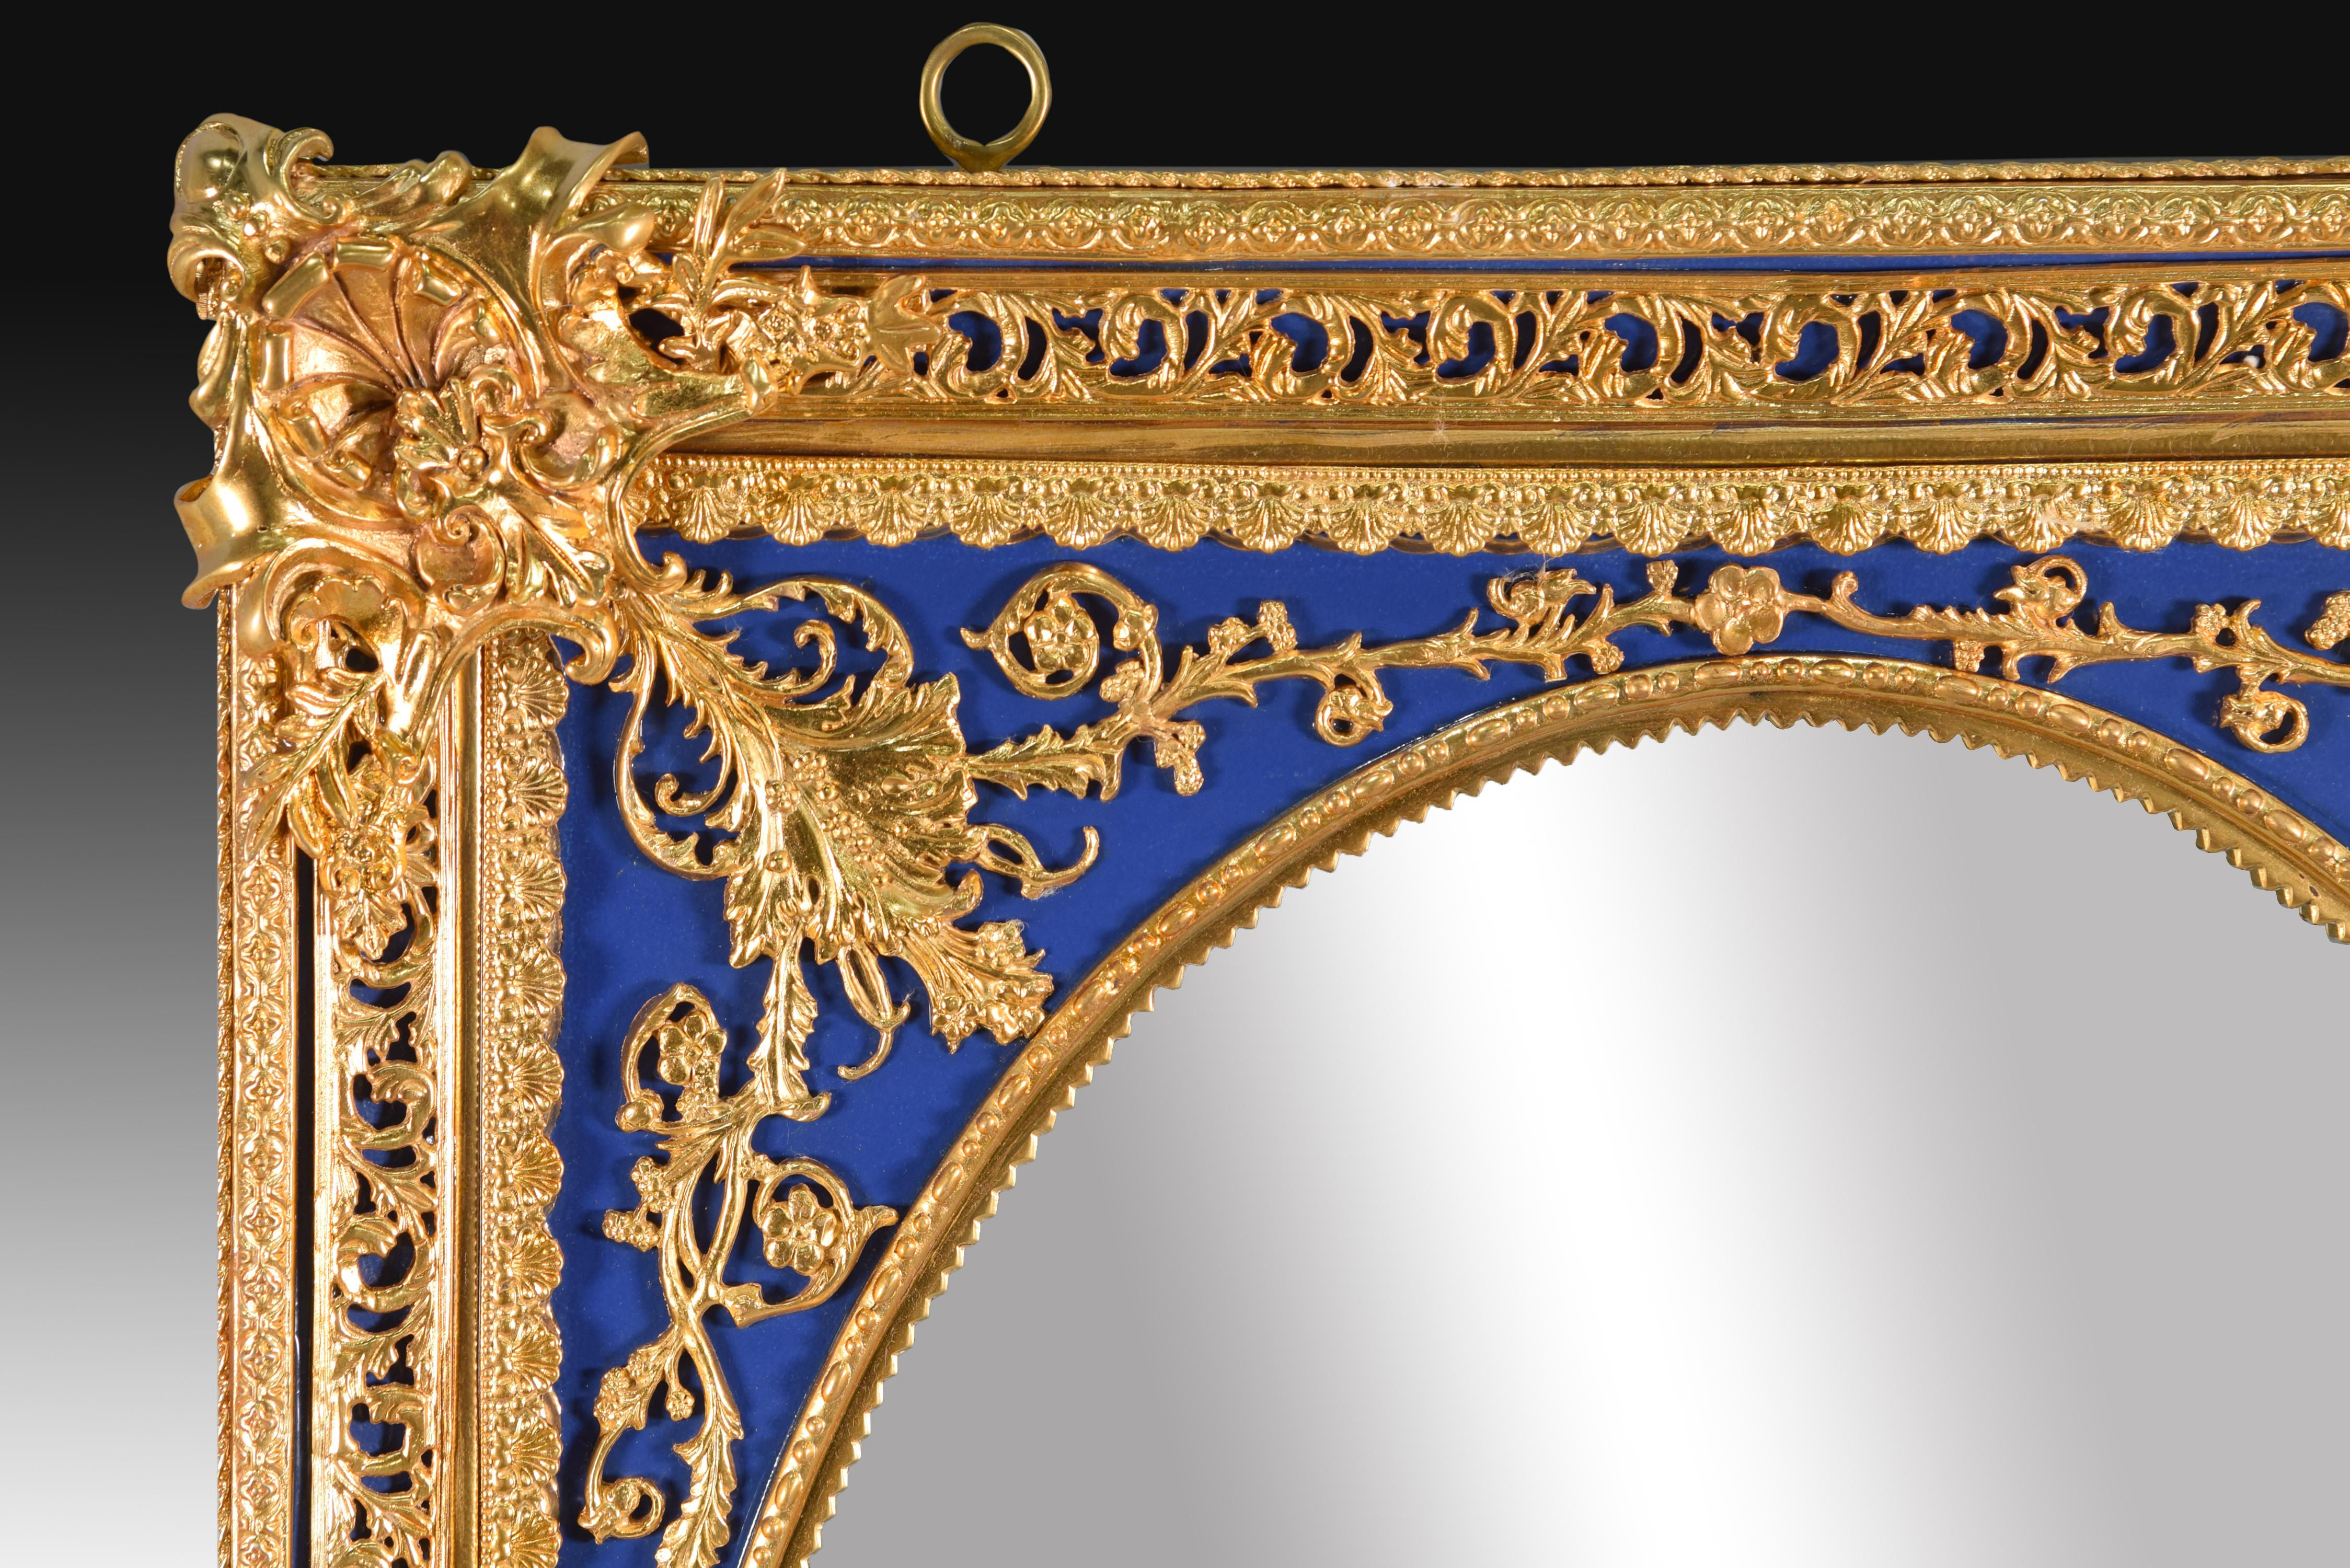 Mirror. Porcelain. 
 Mirror frame made of porcelain and decorated with elements of clear neoclassical inspiration in gold (vegetable, architectural, etc.) on a blue background, following the usual models in the main European porcelain factories of